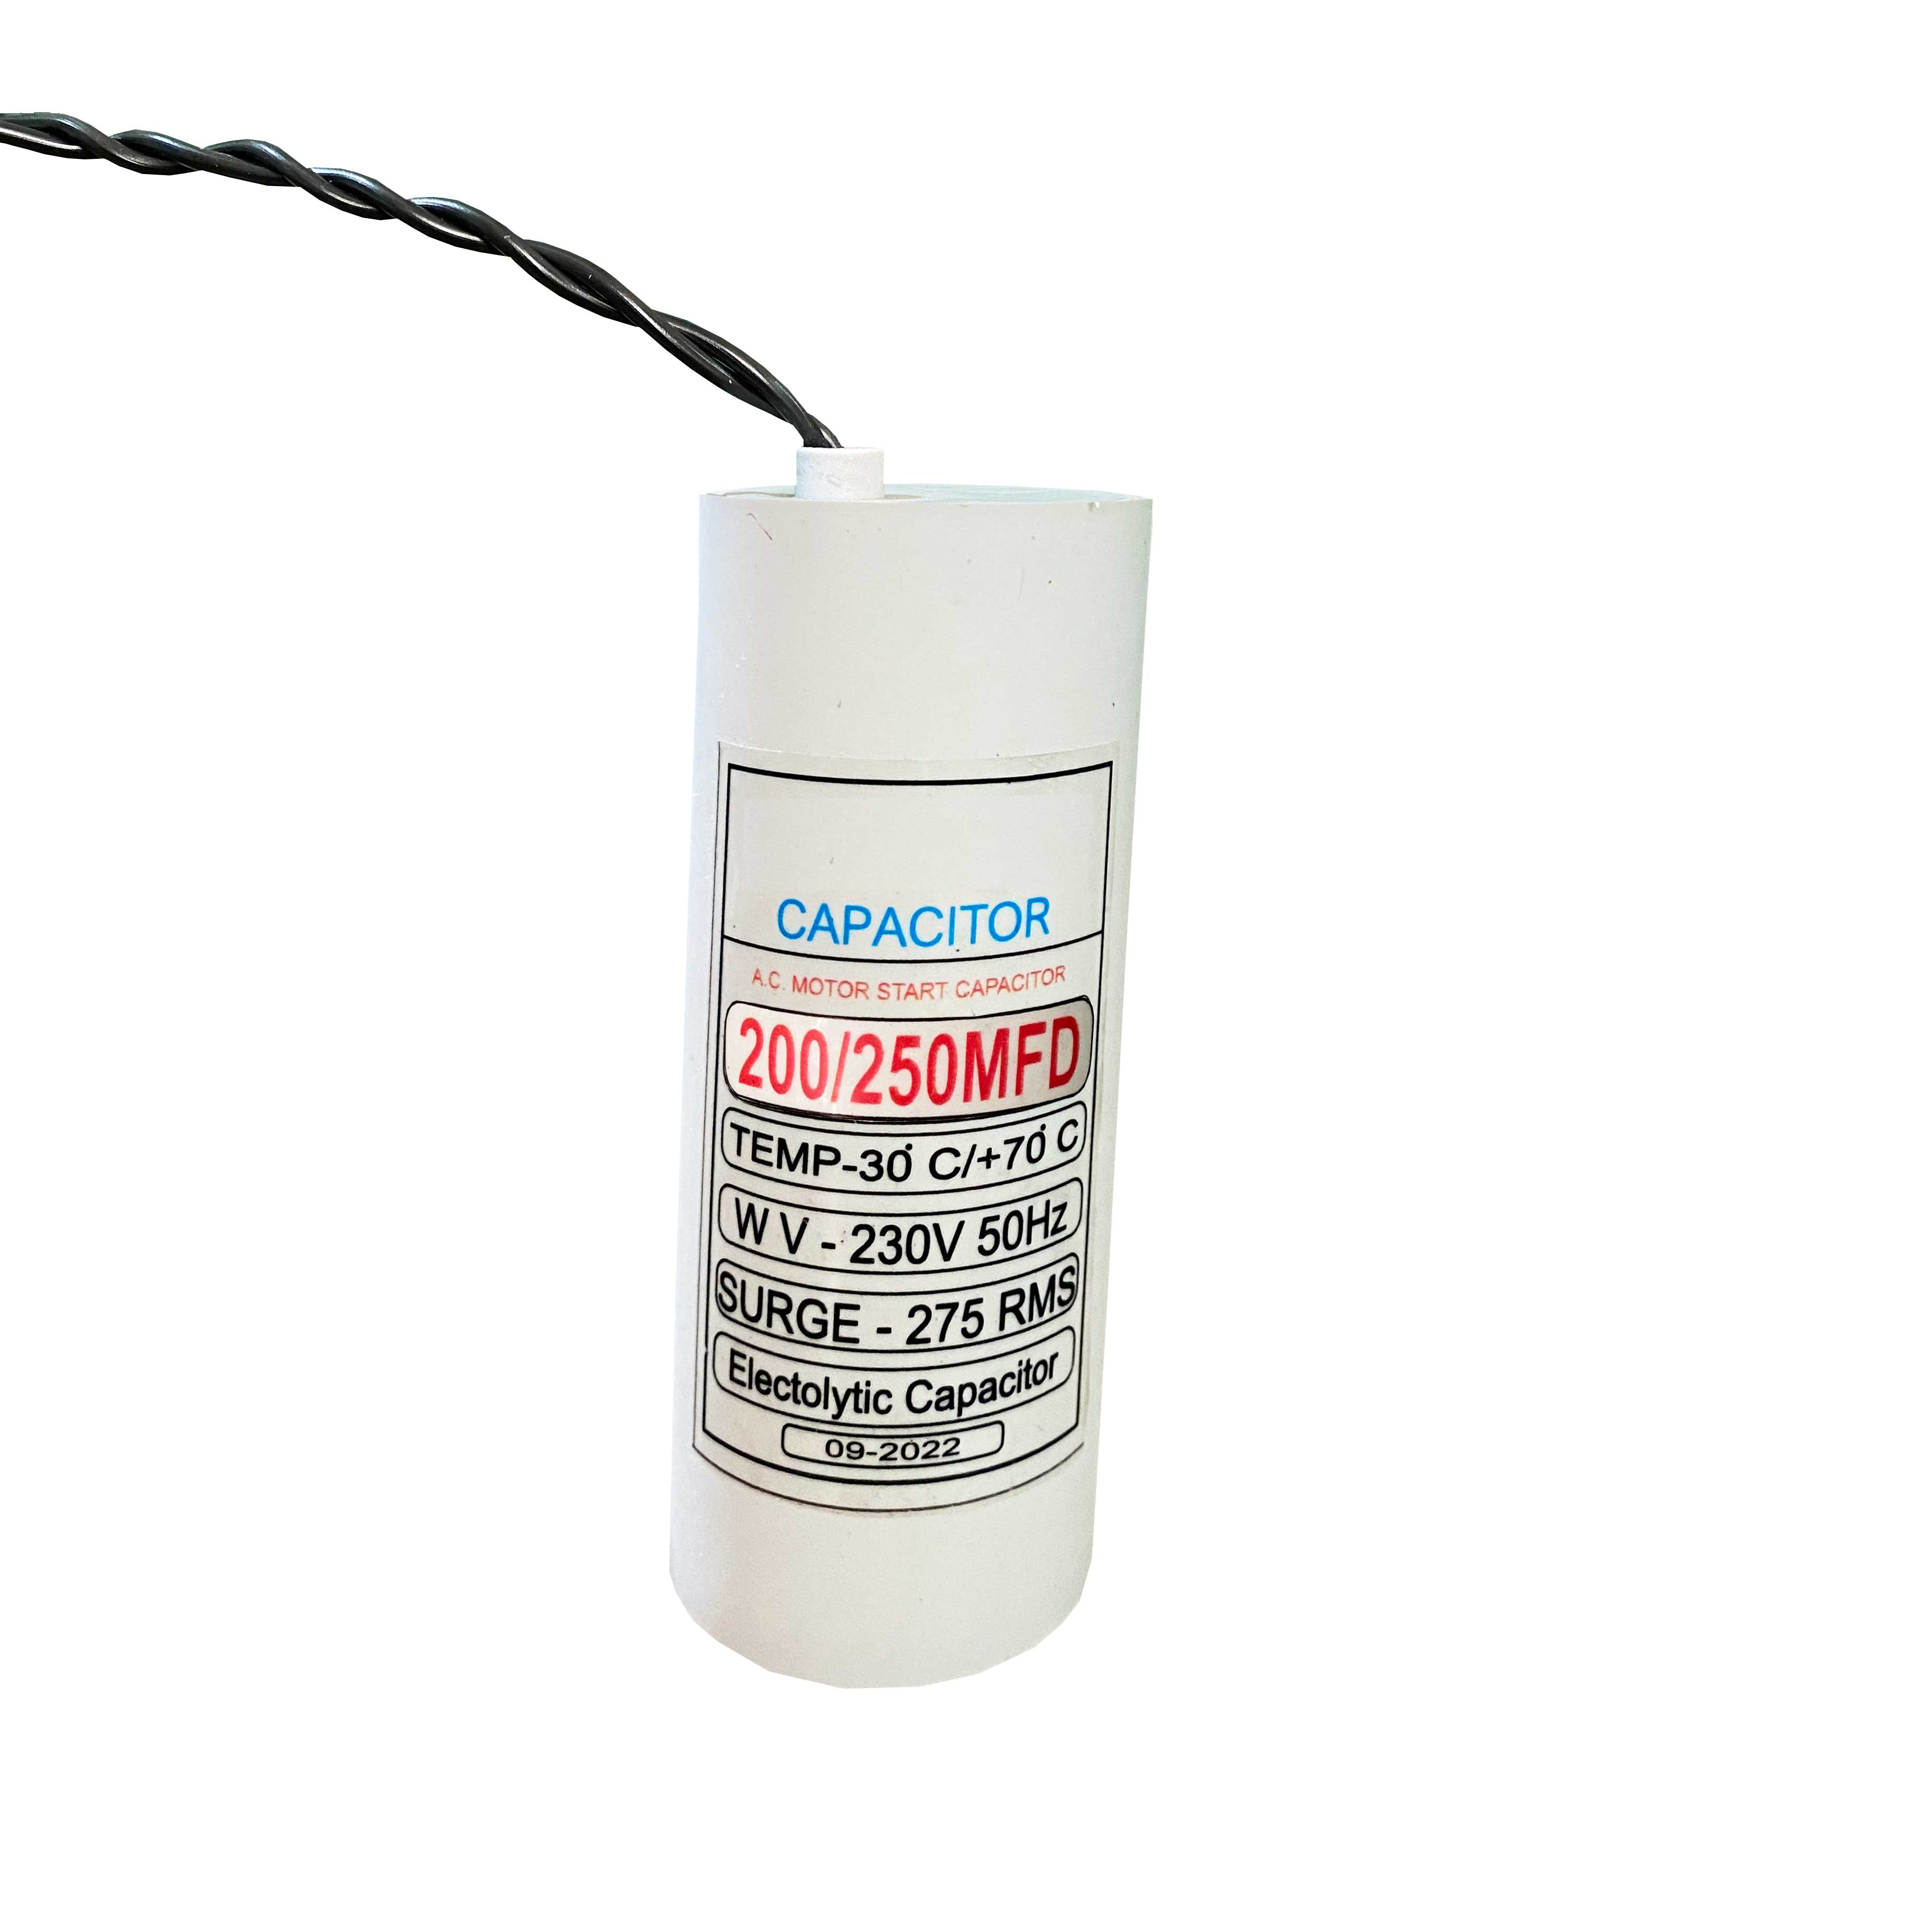 200 250 Start Capacitor suitable for any motor for starting torque